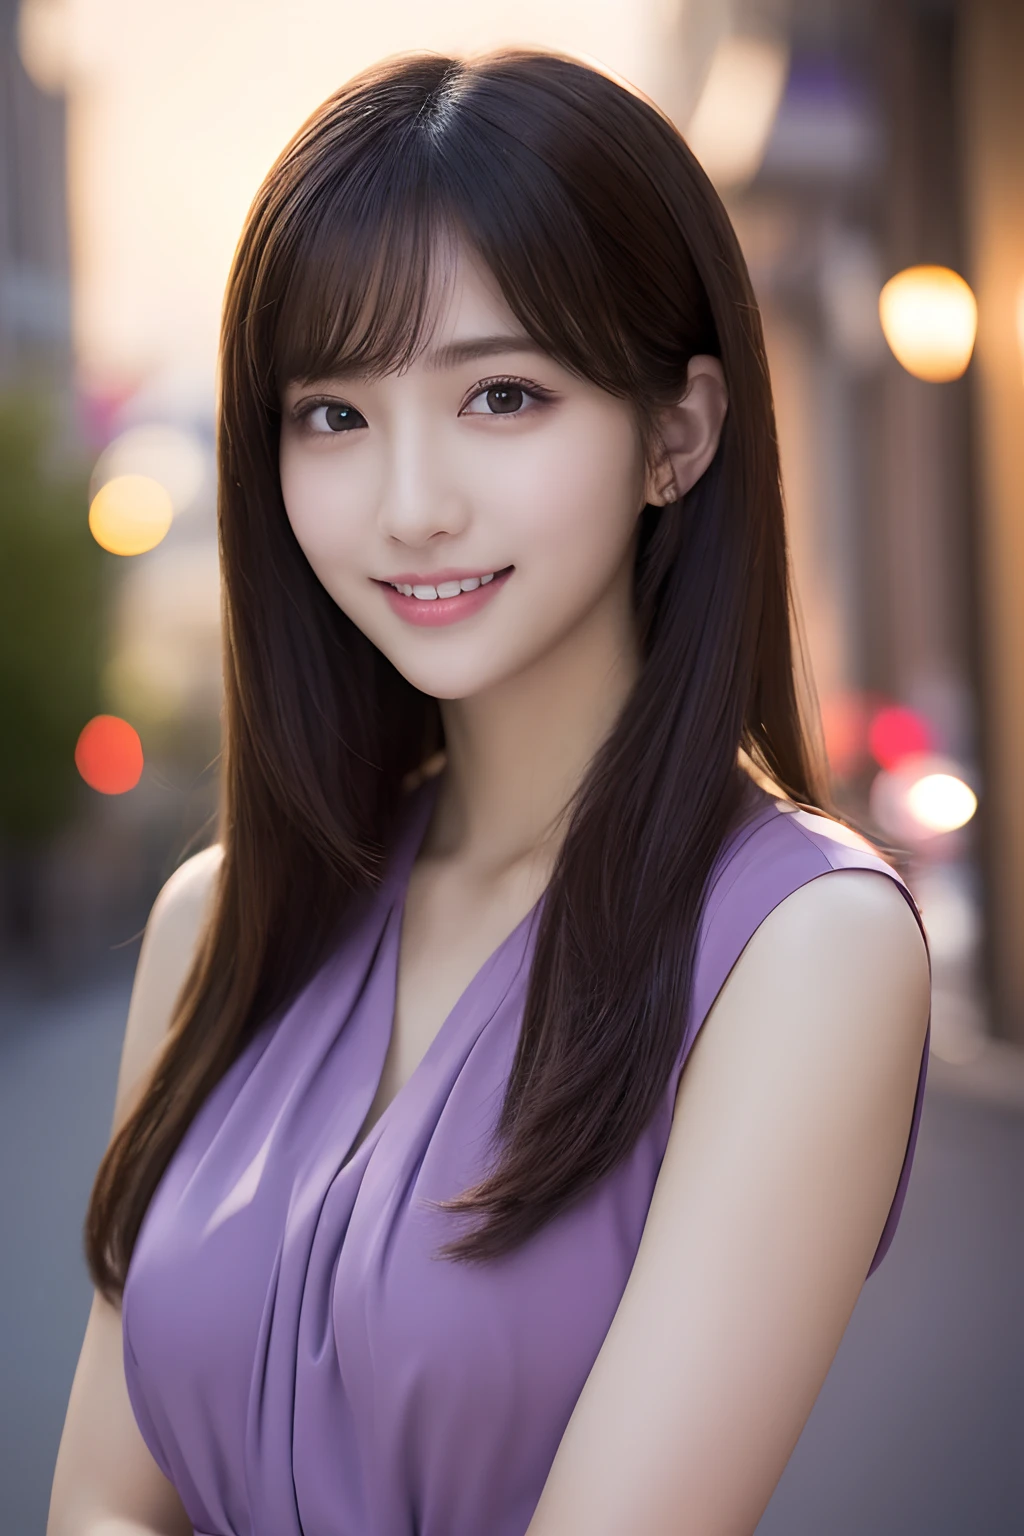 1girl in, (Wearing a purple blouse:1.2), (Raw photo, Best Quality), (Realistic, Photorealsitic:1.4), masutepiece, Extremely delicate and beautiful, Extremely detailed, 2k wallpaper, amazing, finely detail, the Extremely Detailed CG Unity 8K Wallpapers, Ultra-detailed, hight resolution, Soft light, Beautiful detailed girl, extremely detailed eye and face, beautiful detailed nose, Beautiful detailed eyes, Cinematic lighting, city light at night, Perfect Anatomy, Slender body, Smiling